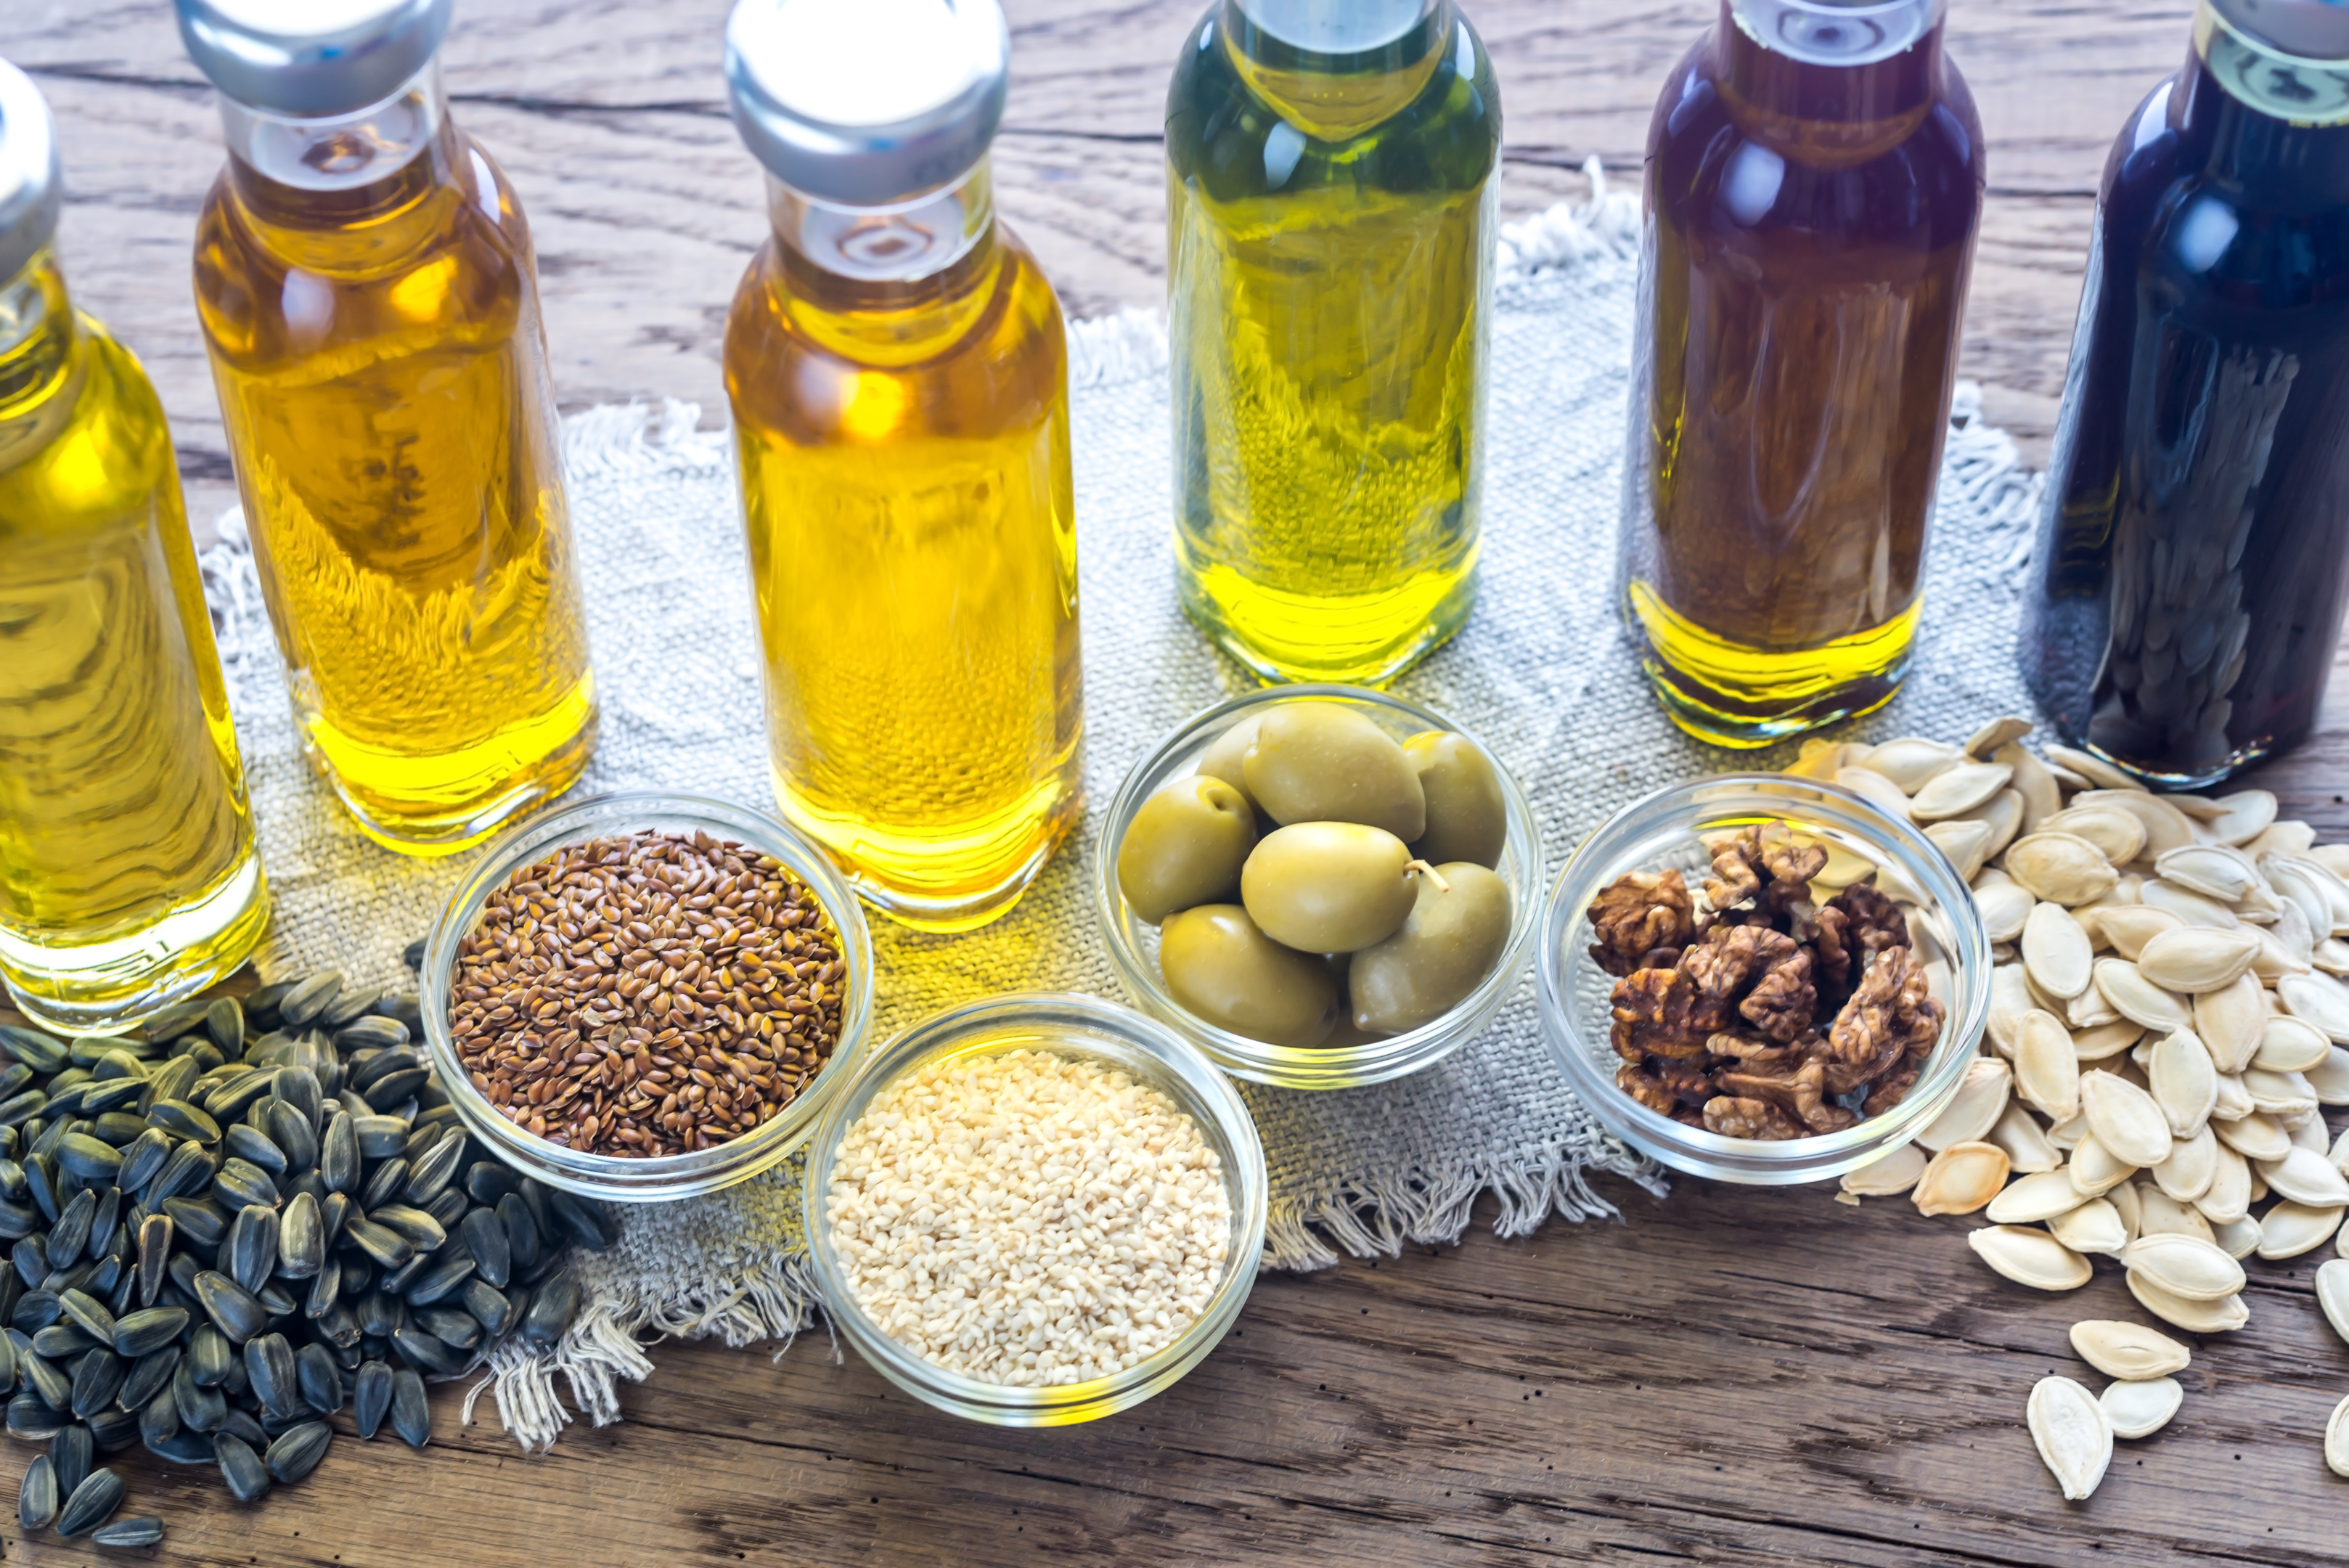 Add some more calories to your diet with healthy oils to add with lunch and dinner